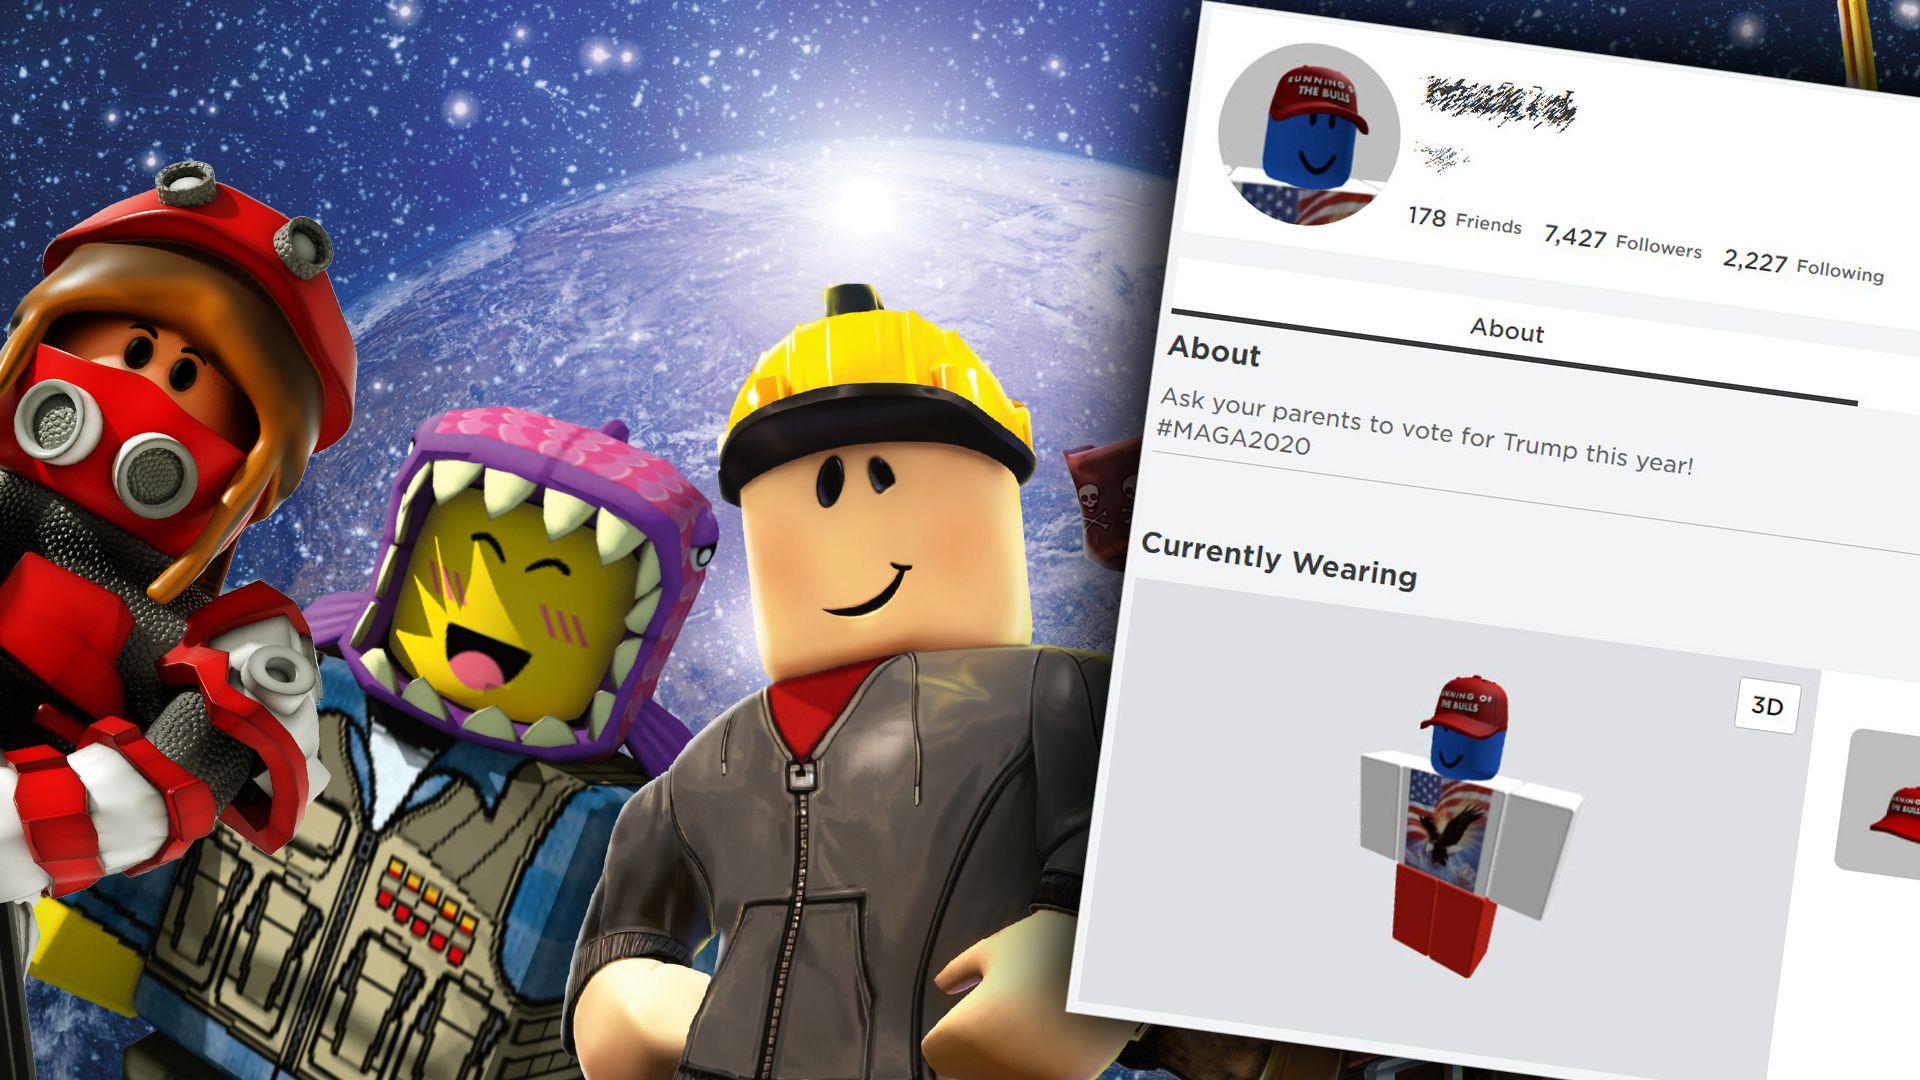 Get friends with us hackers - Roblox